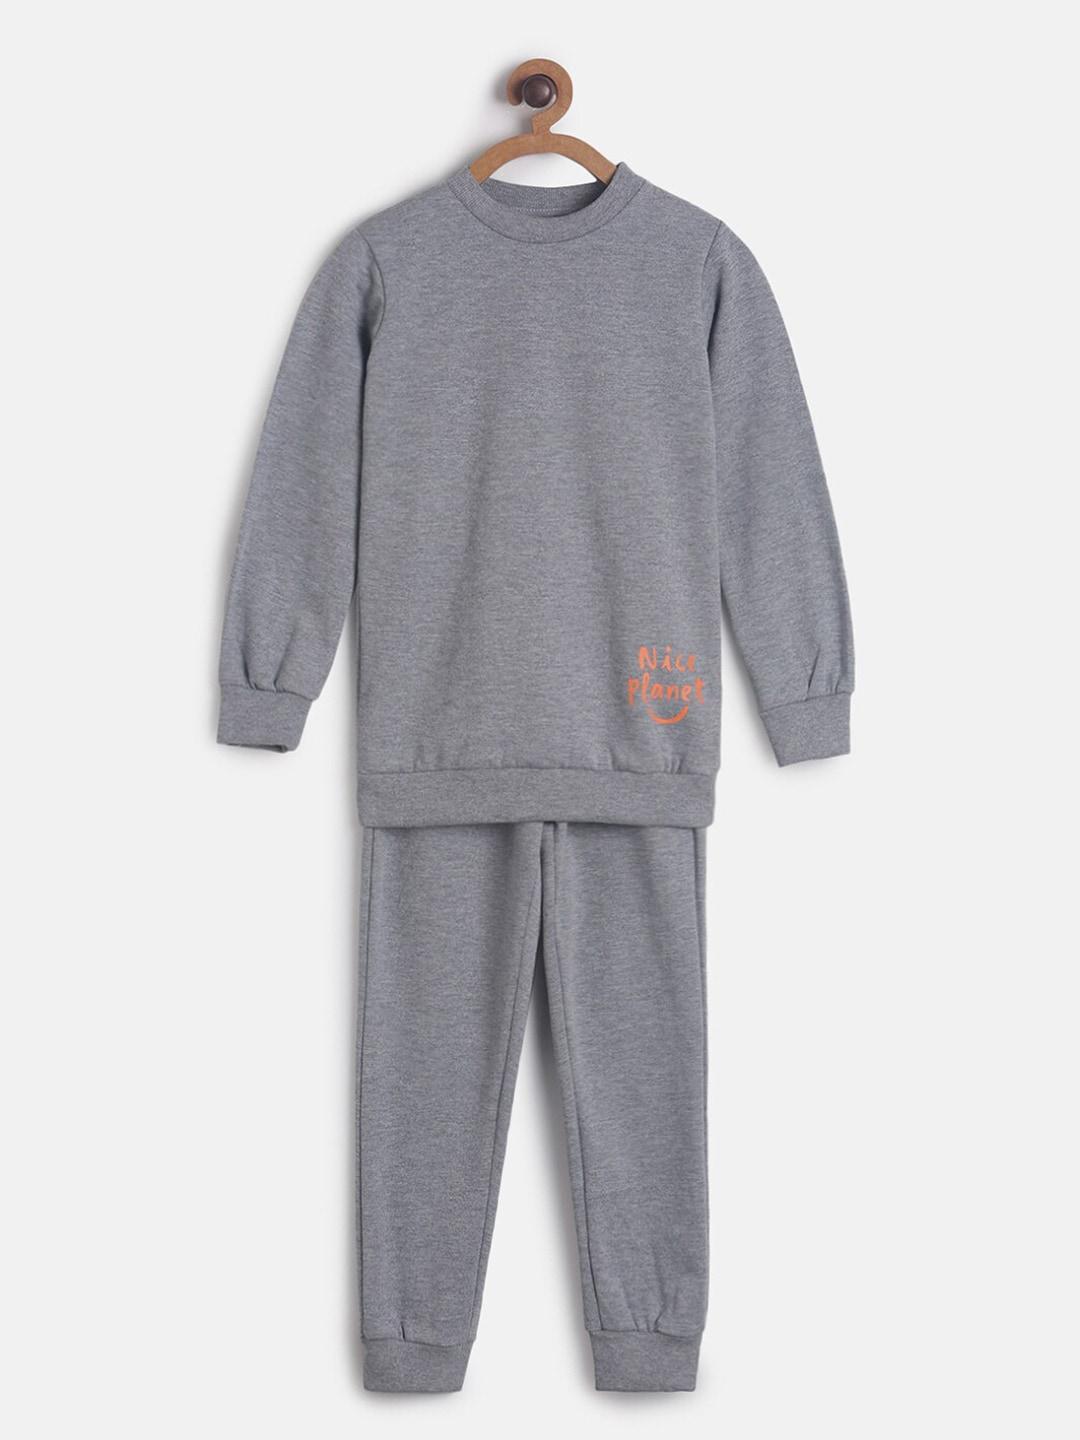 tales & stories boys grey solid t-shirt with pyjamas